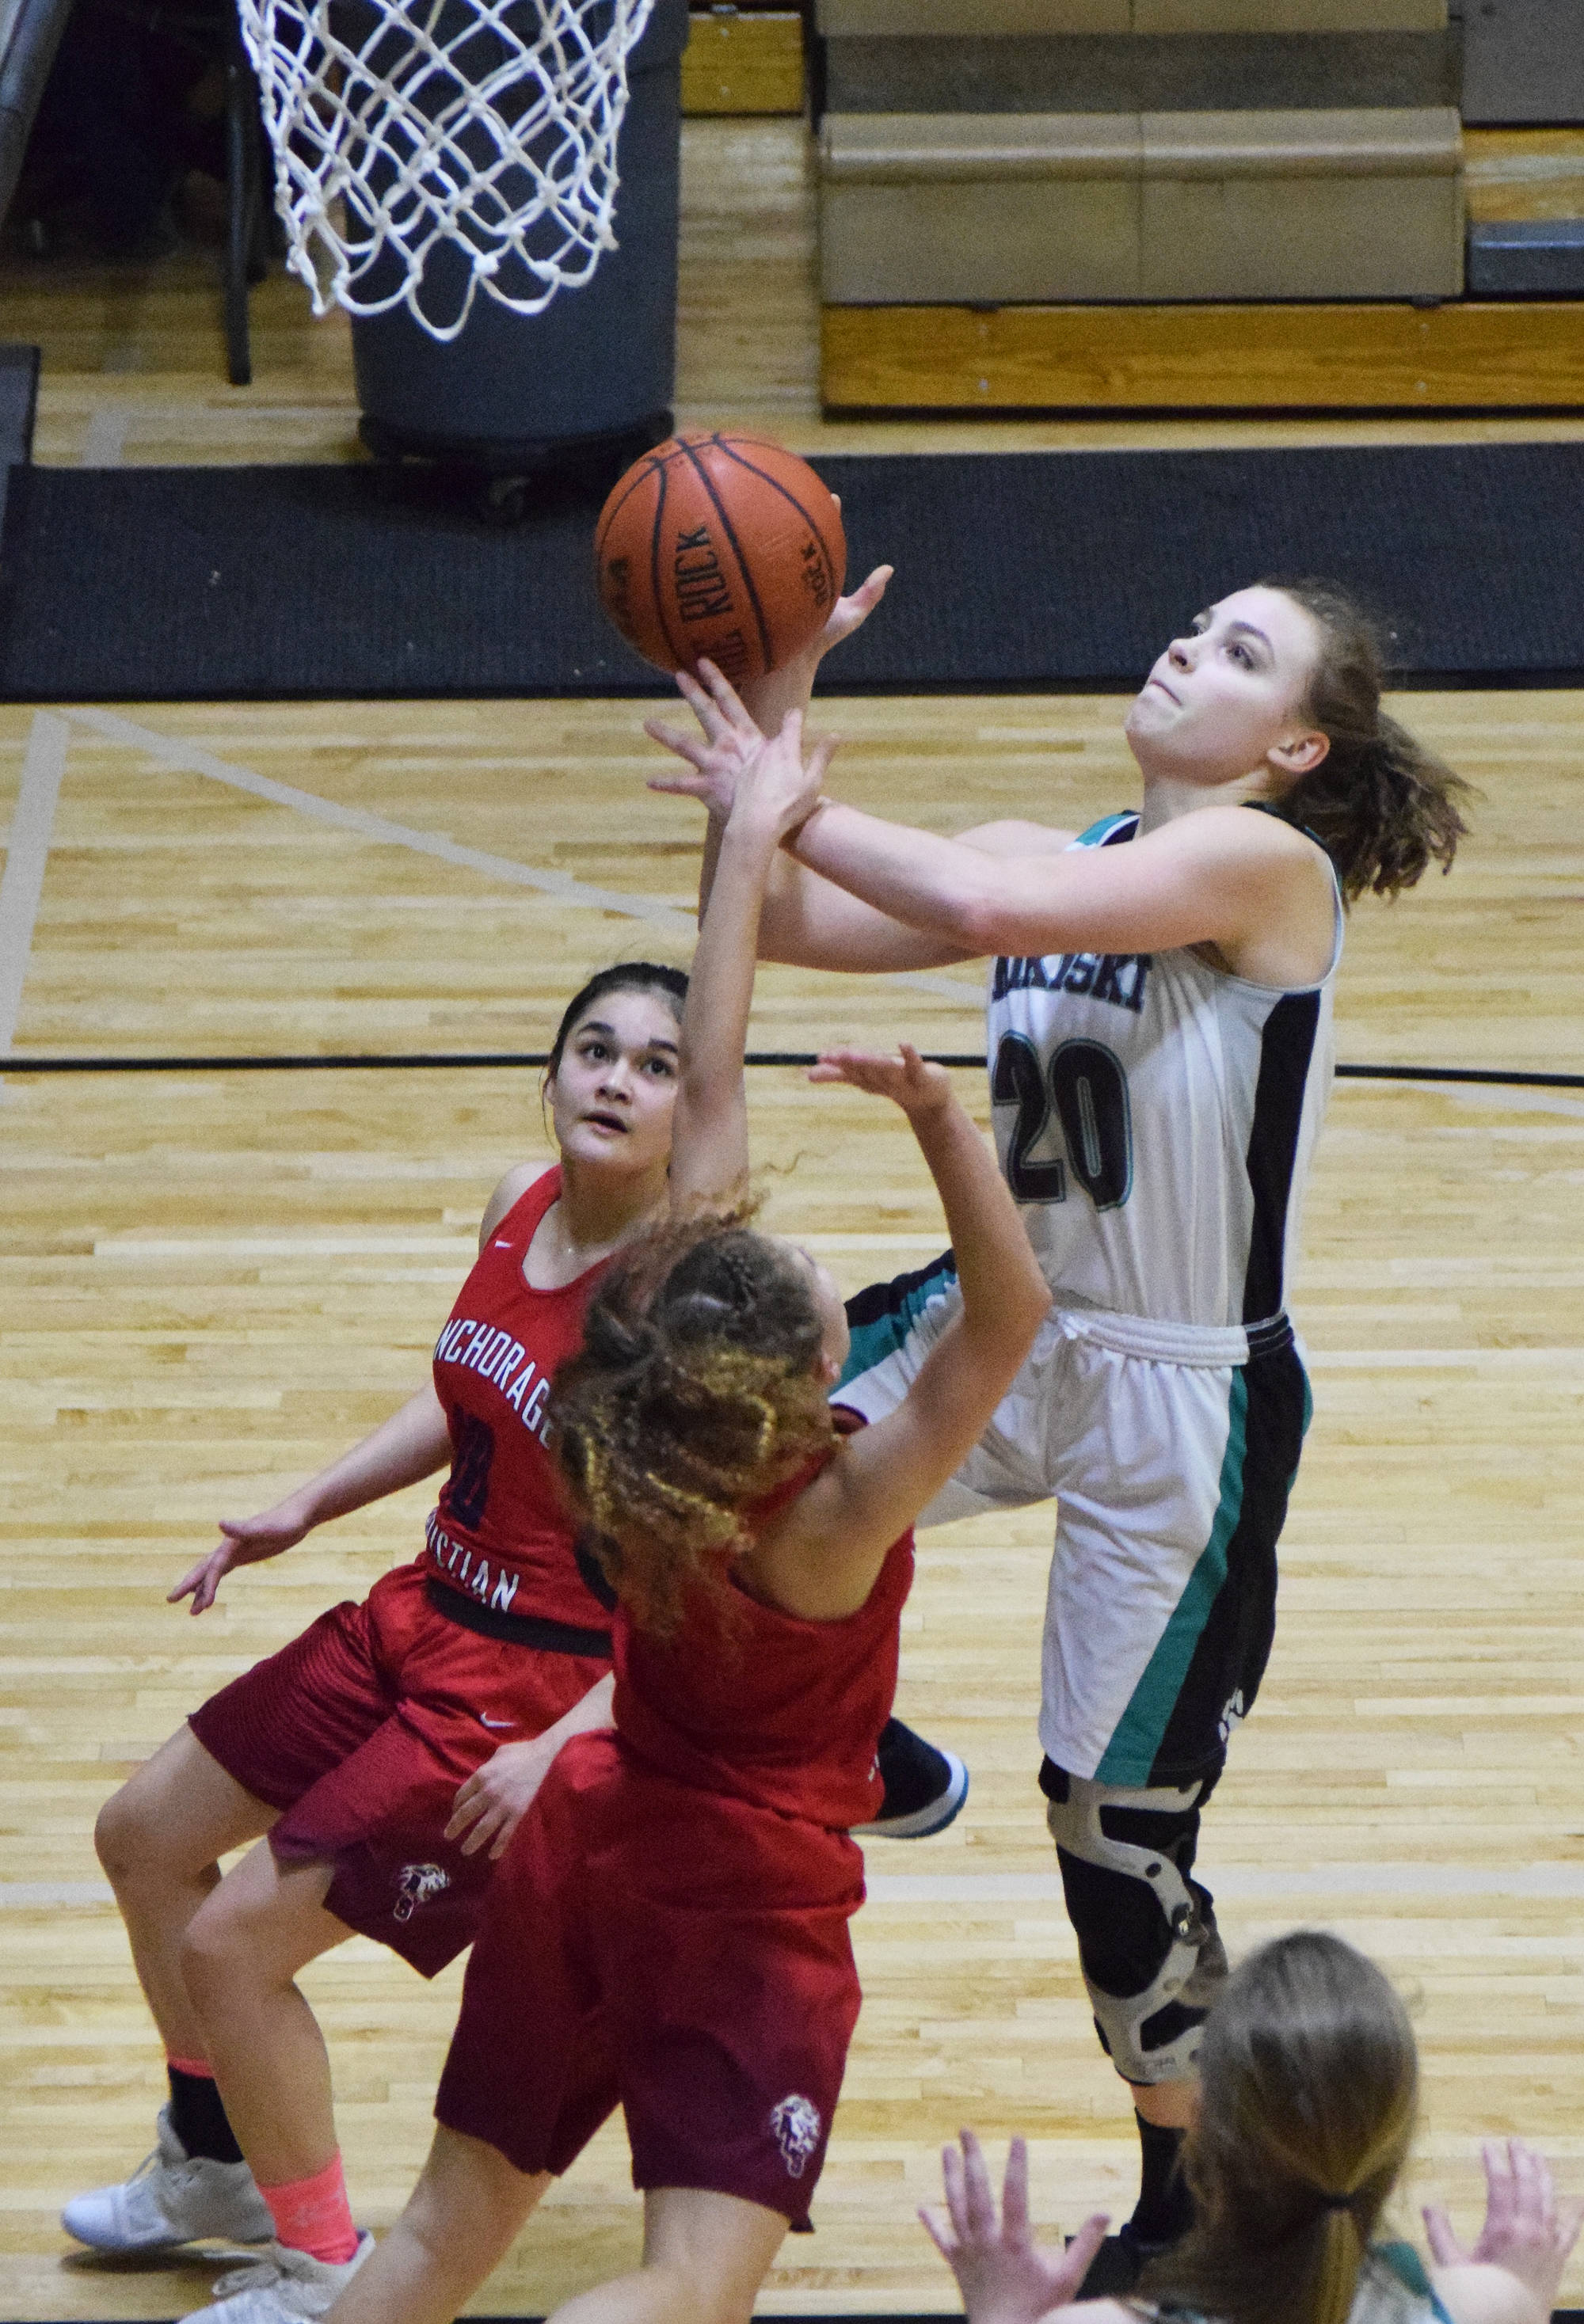 Nikiski’s Bethany Carstens drives for a layup over ACS defenders Mary Kate Parks (middle) and Jessie Davis Friday at Nikiski High School. (Photo by Joey Klecka/Peninsula Clarion)